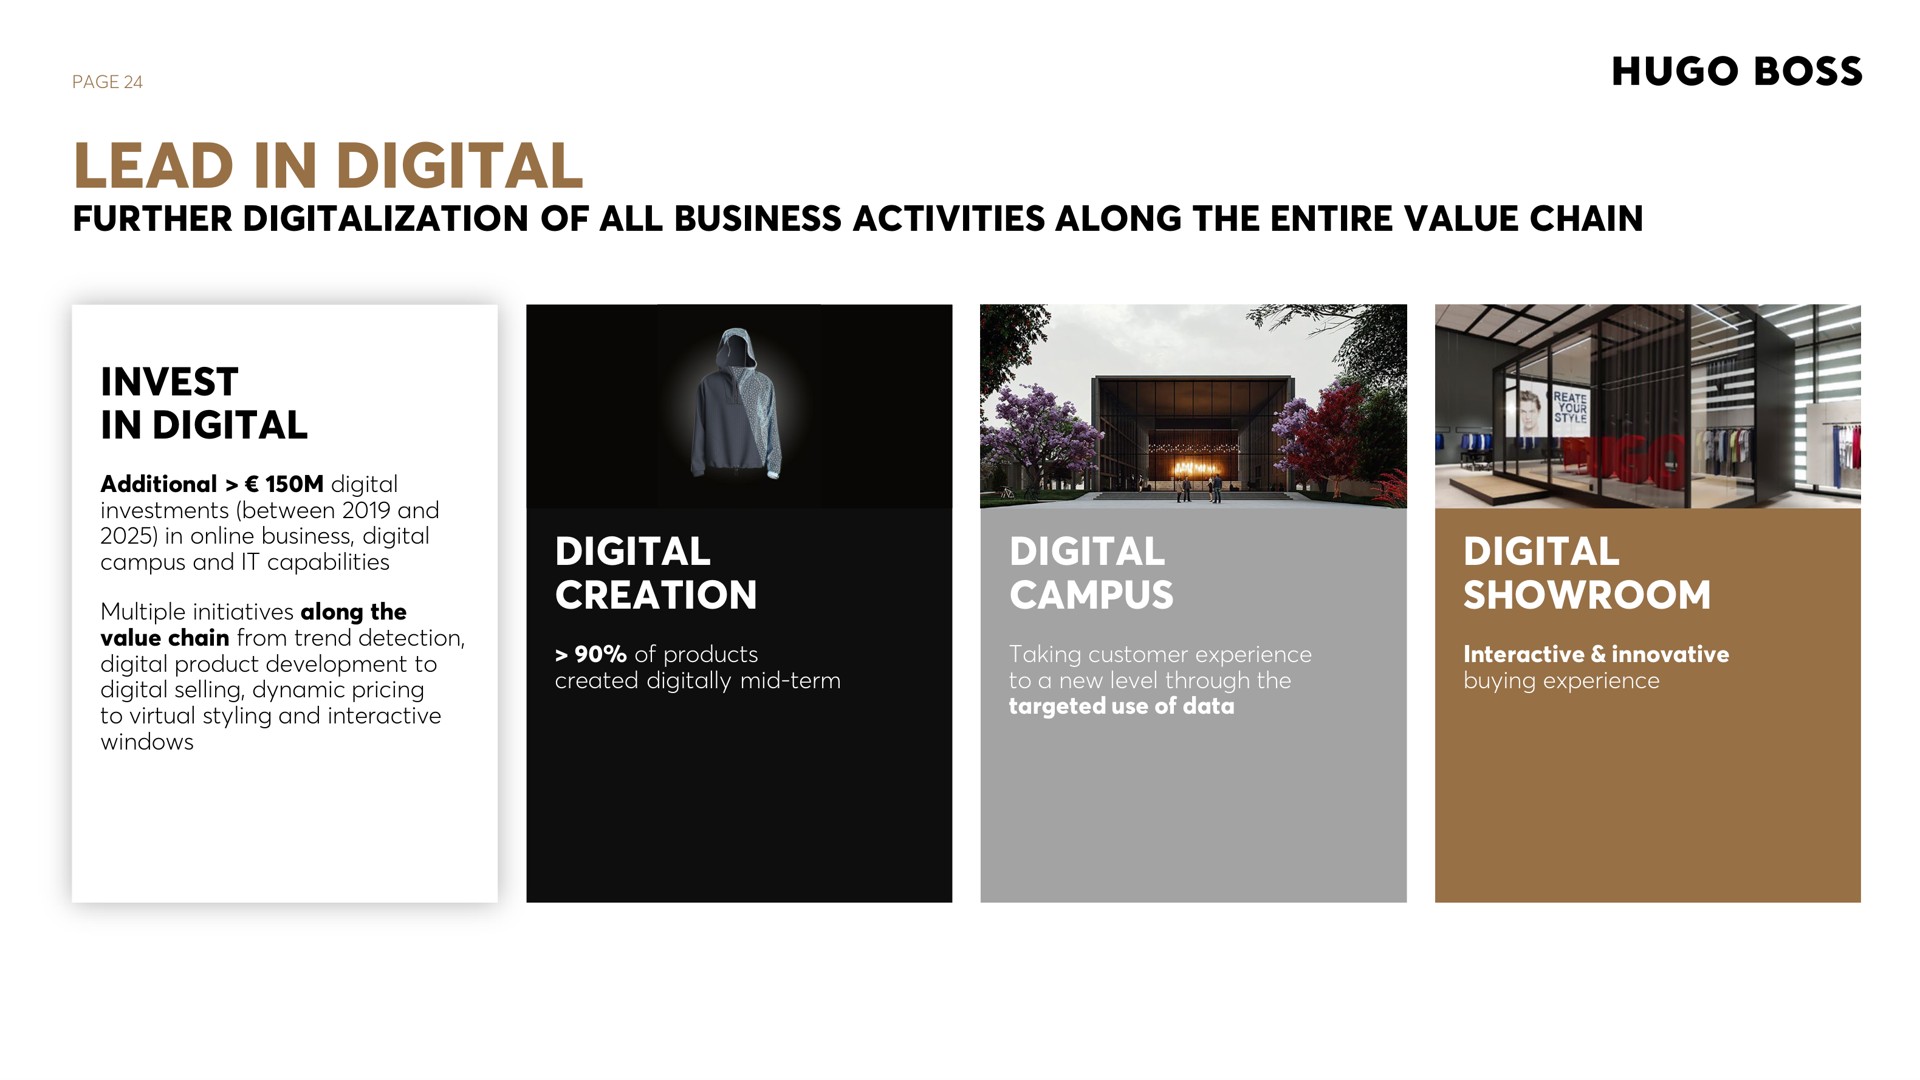 page lead in digital further digitalization of all business activities along the entire value chain invest in digital additional digital investments between and in business digital campus and it capabilities multiple initiatives along the value chain from trend detection digital product development to digital selling dynamic pricing to virtual styling and interactive windows digital creation of products created digitally mid term digital campus taking customer experience to a new level through the targeted use of data digital showroom interactive innovative buying experience boss | Hugo Boss